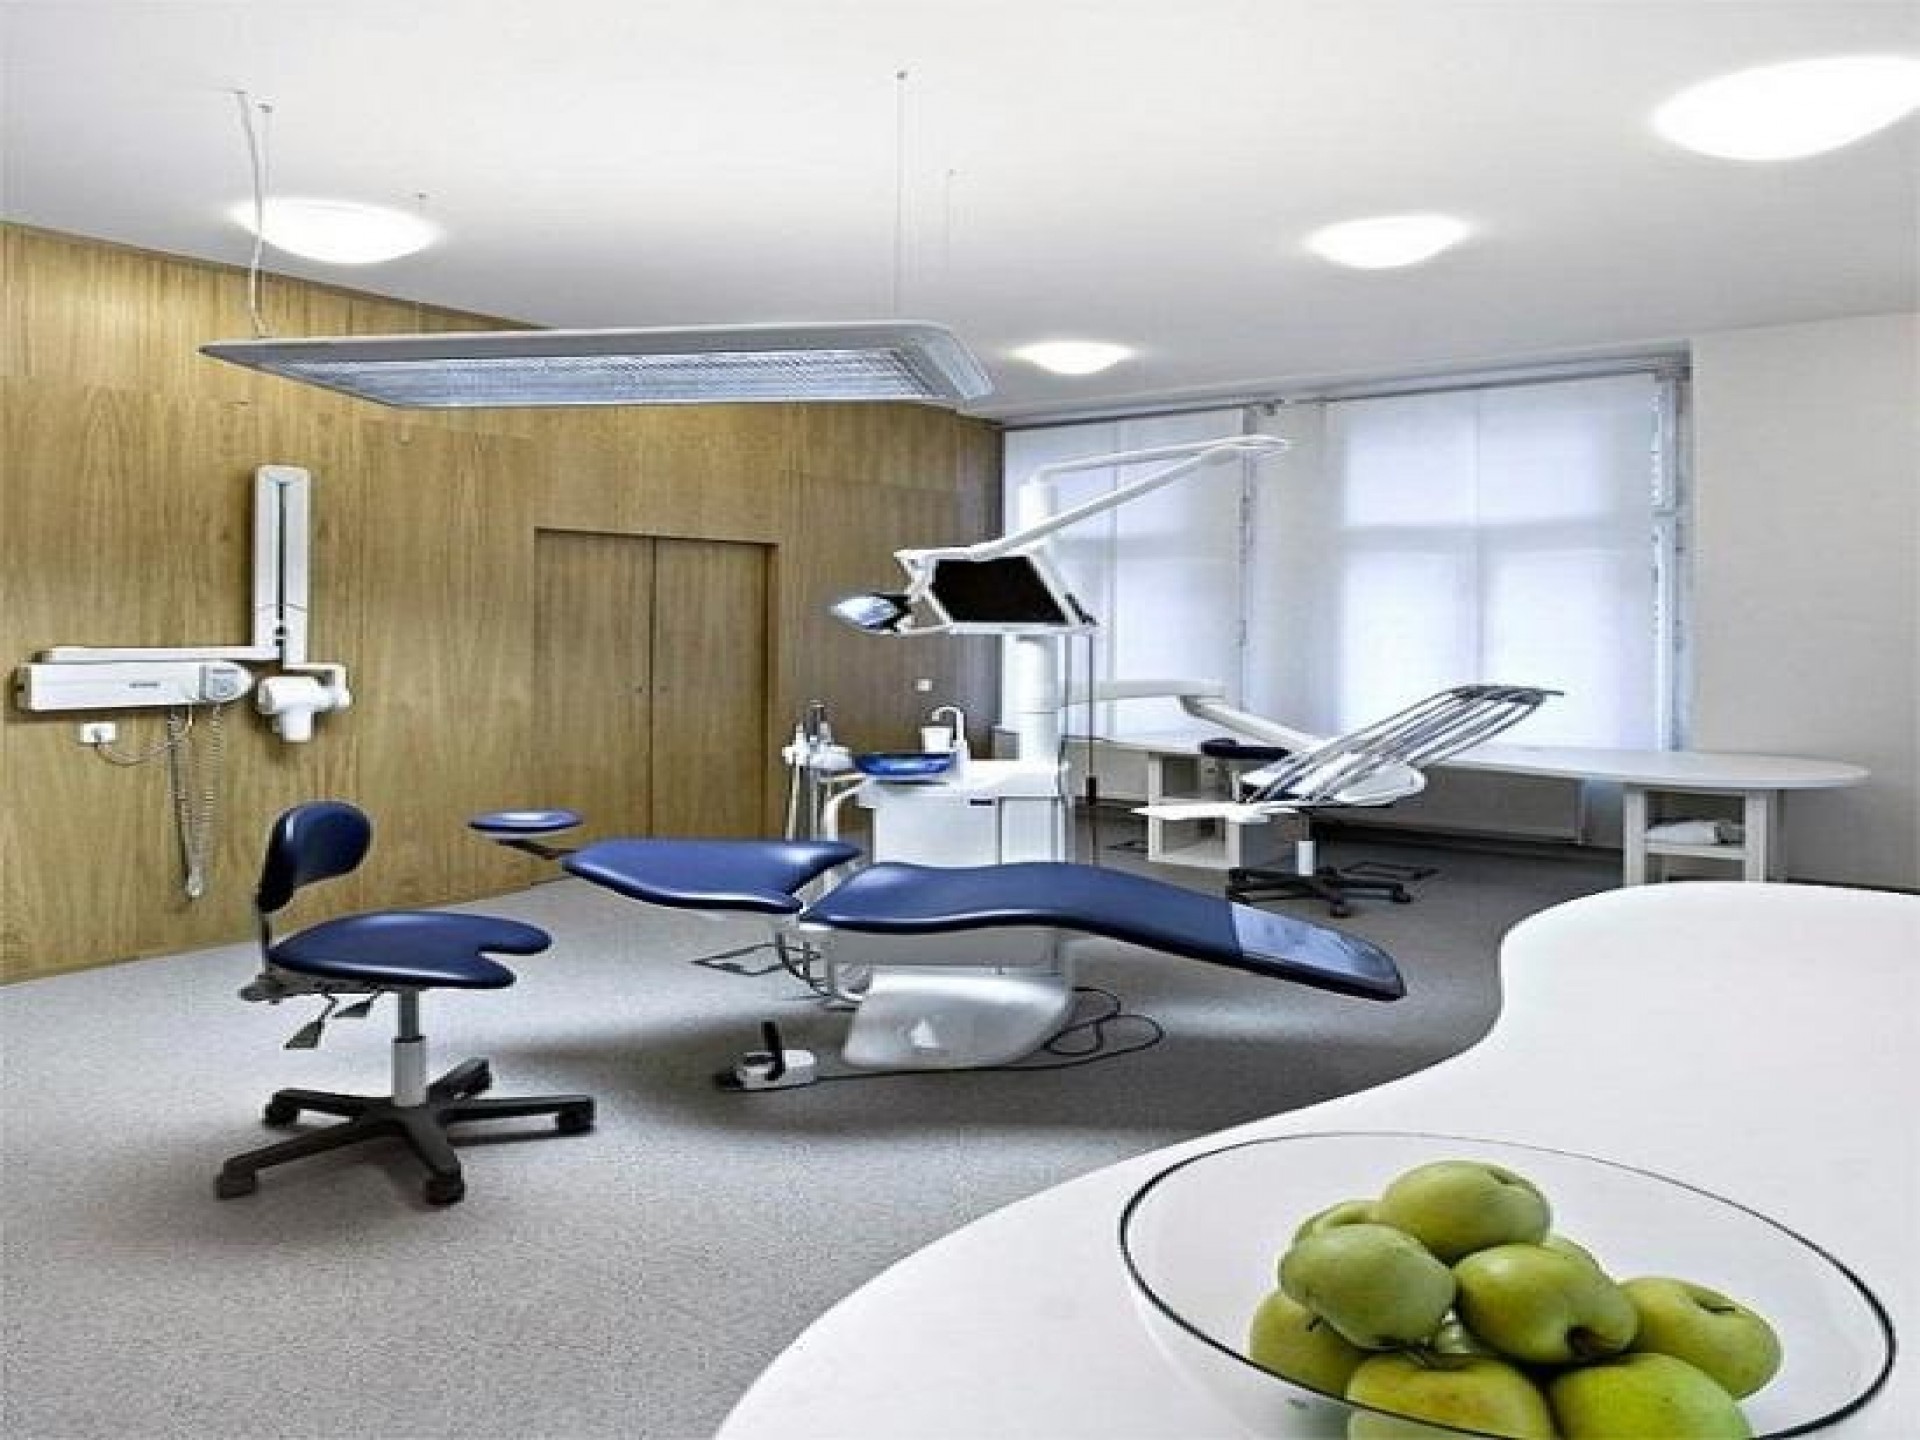 1920x1440, Image Of - Dental Clinic Interior Design , HD Wallpaper & Backgrounds